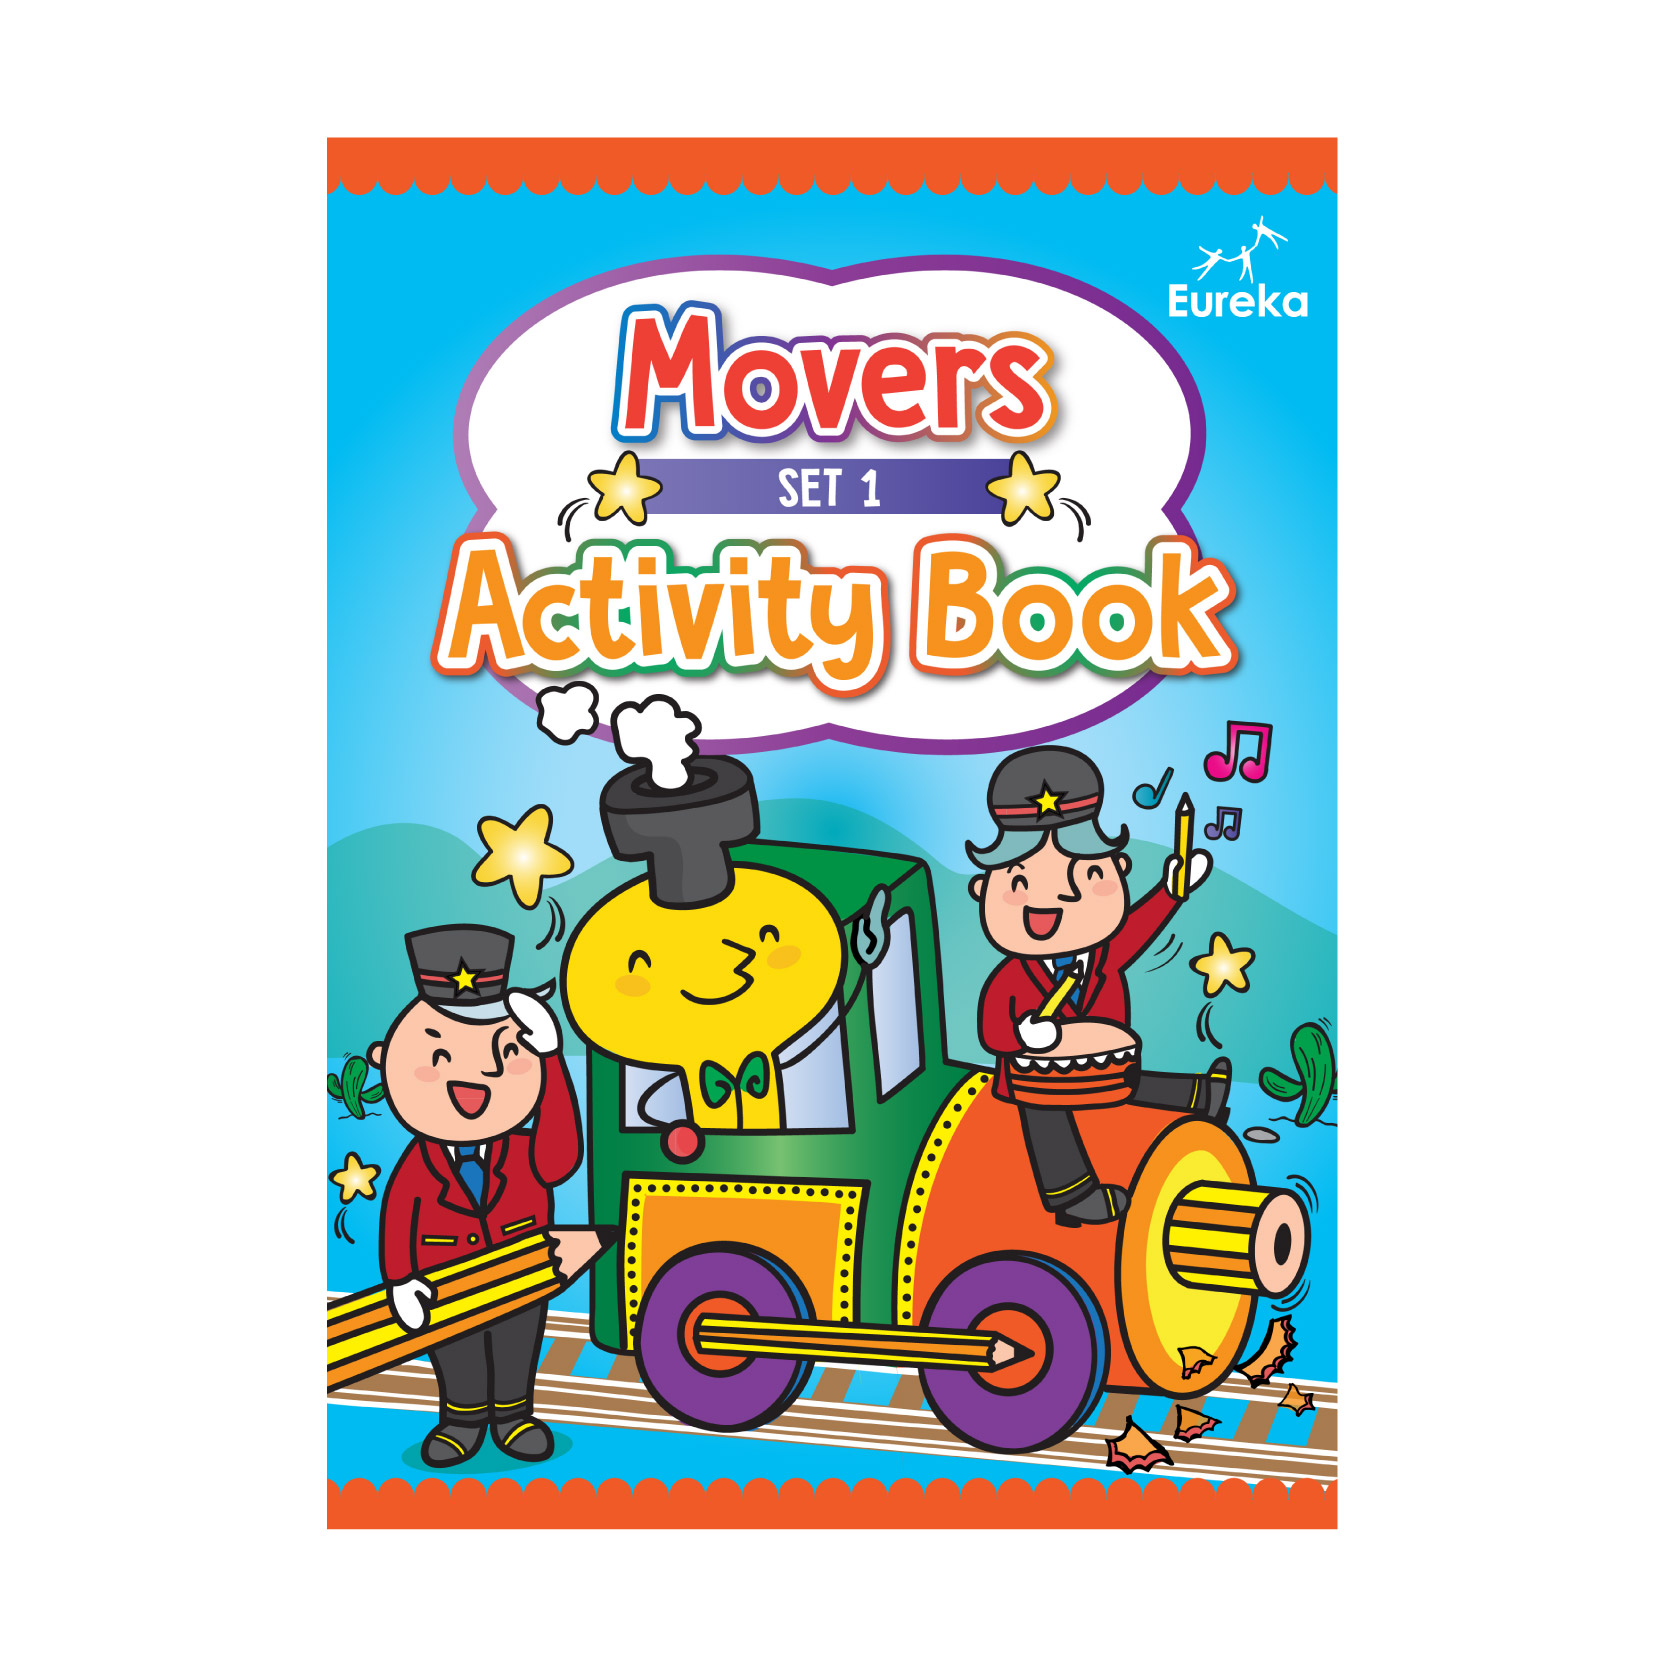 cambridge-english-movers-activity-book-movers-eureka-language-services-limited